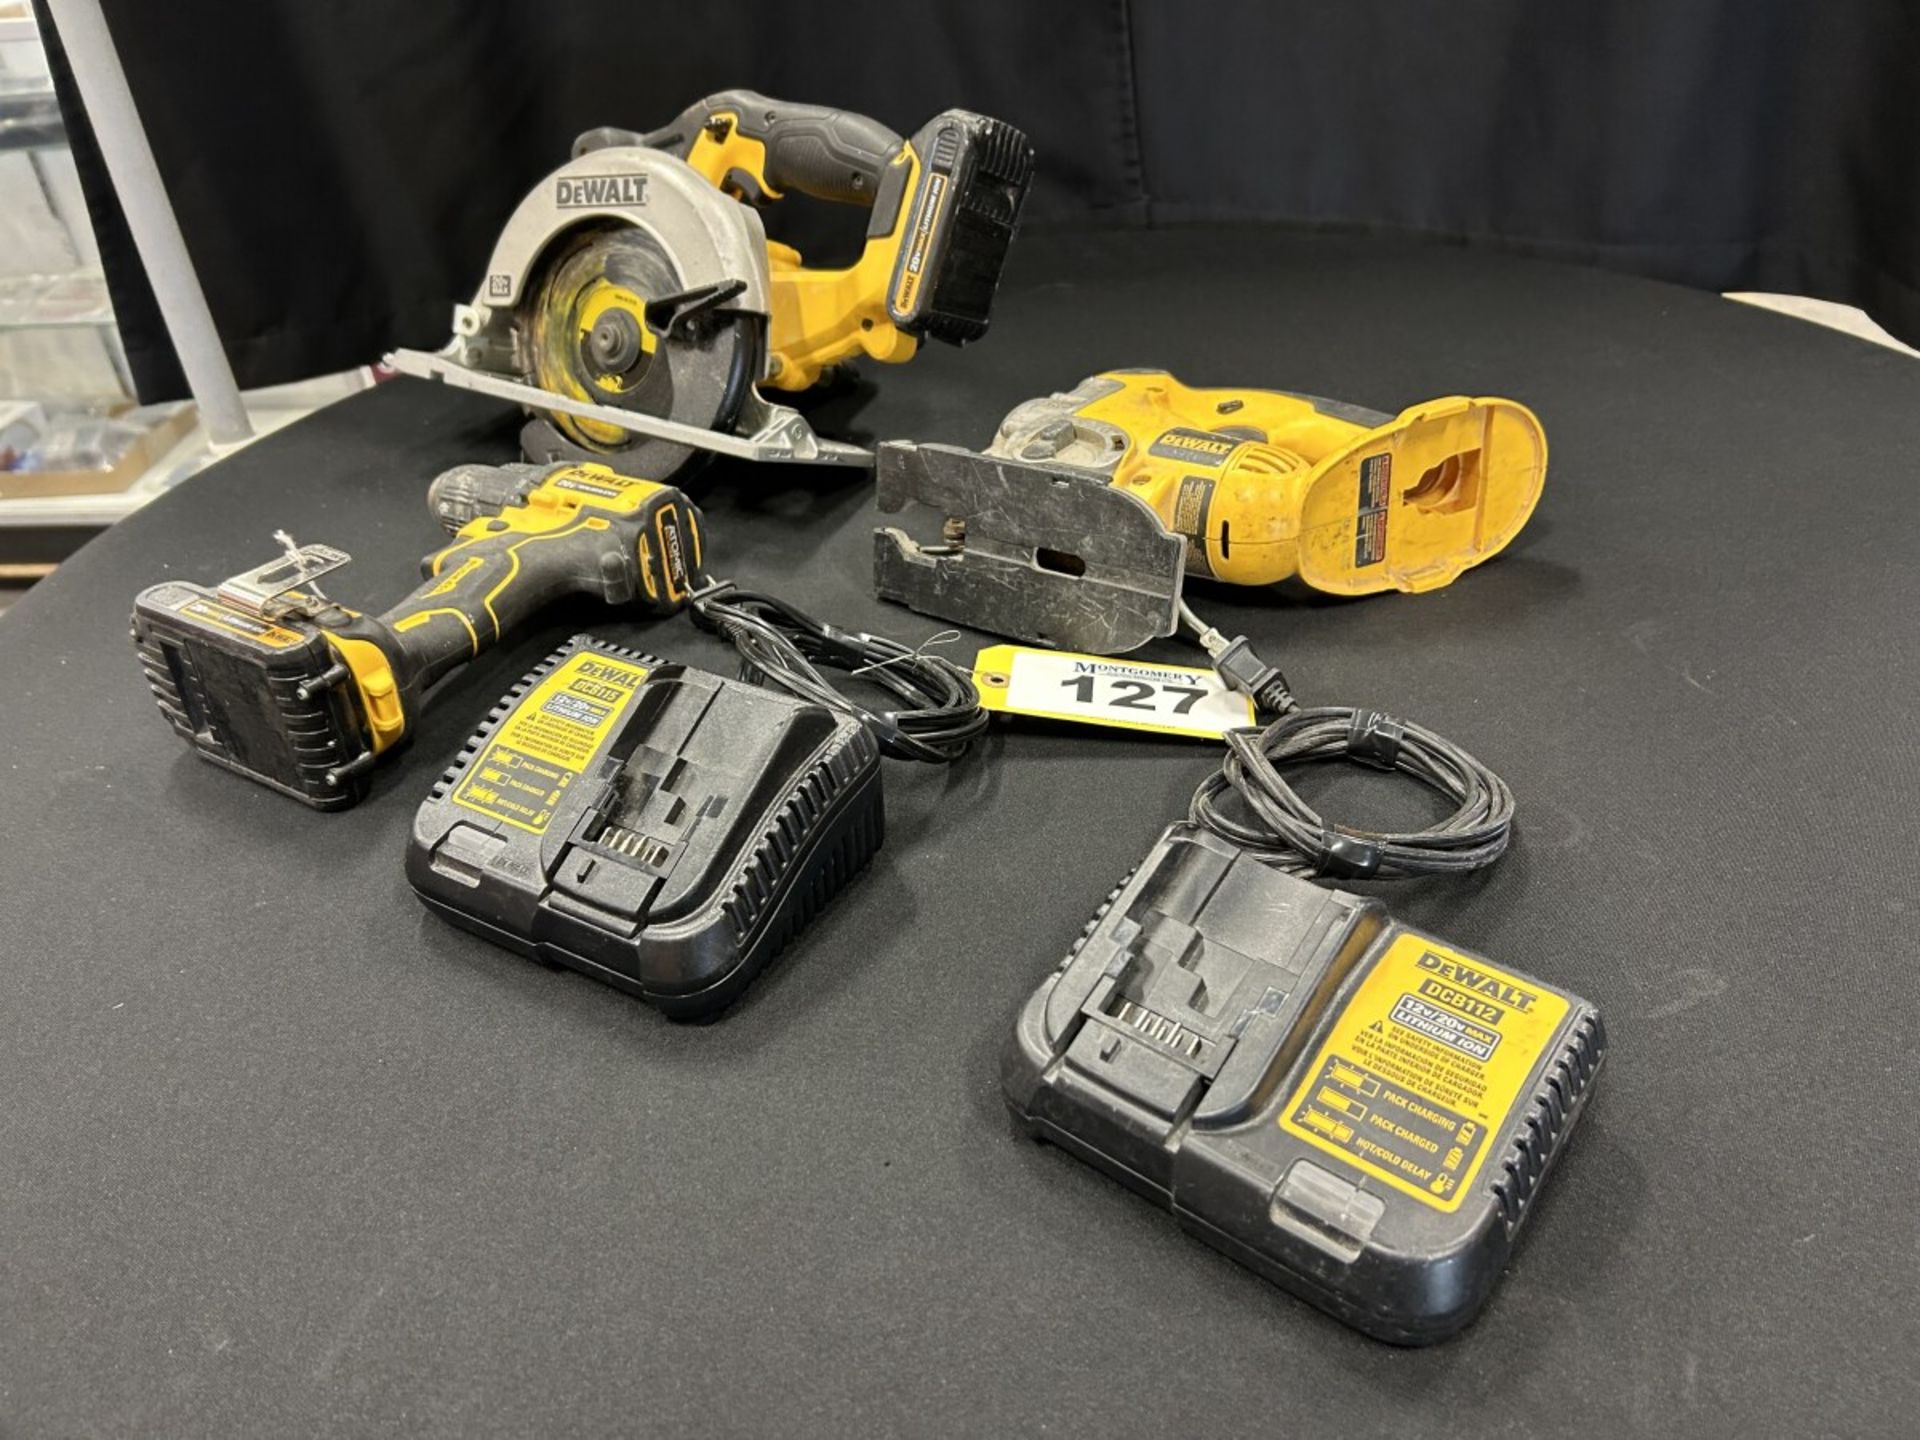 DEWALT CORDLESS JIG SAW, CIRCULAR SAW, DRILL, 2 BATTERIES AND 2 CHARGERS - B40 - Image 13 of 14